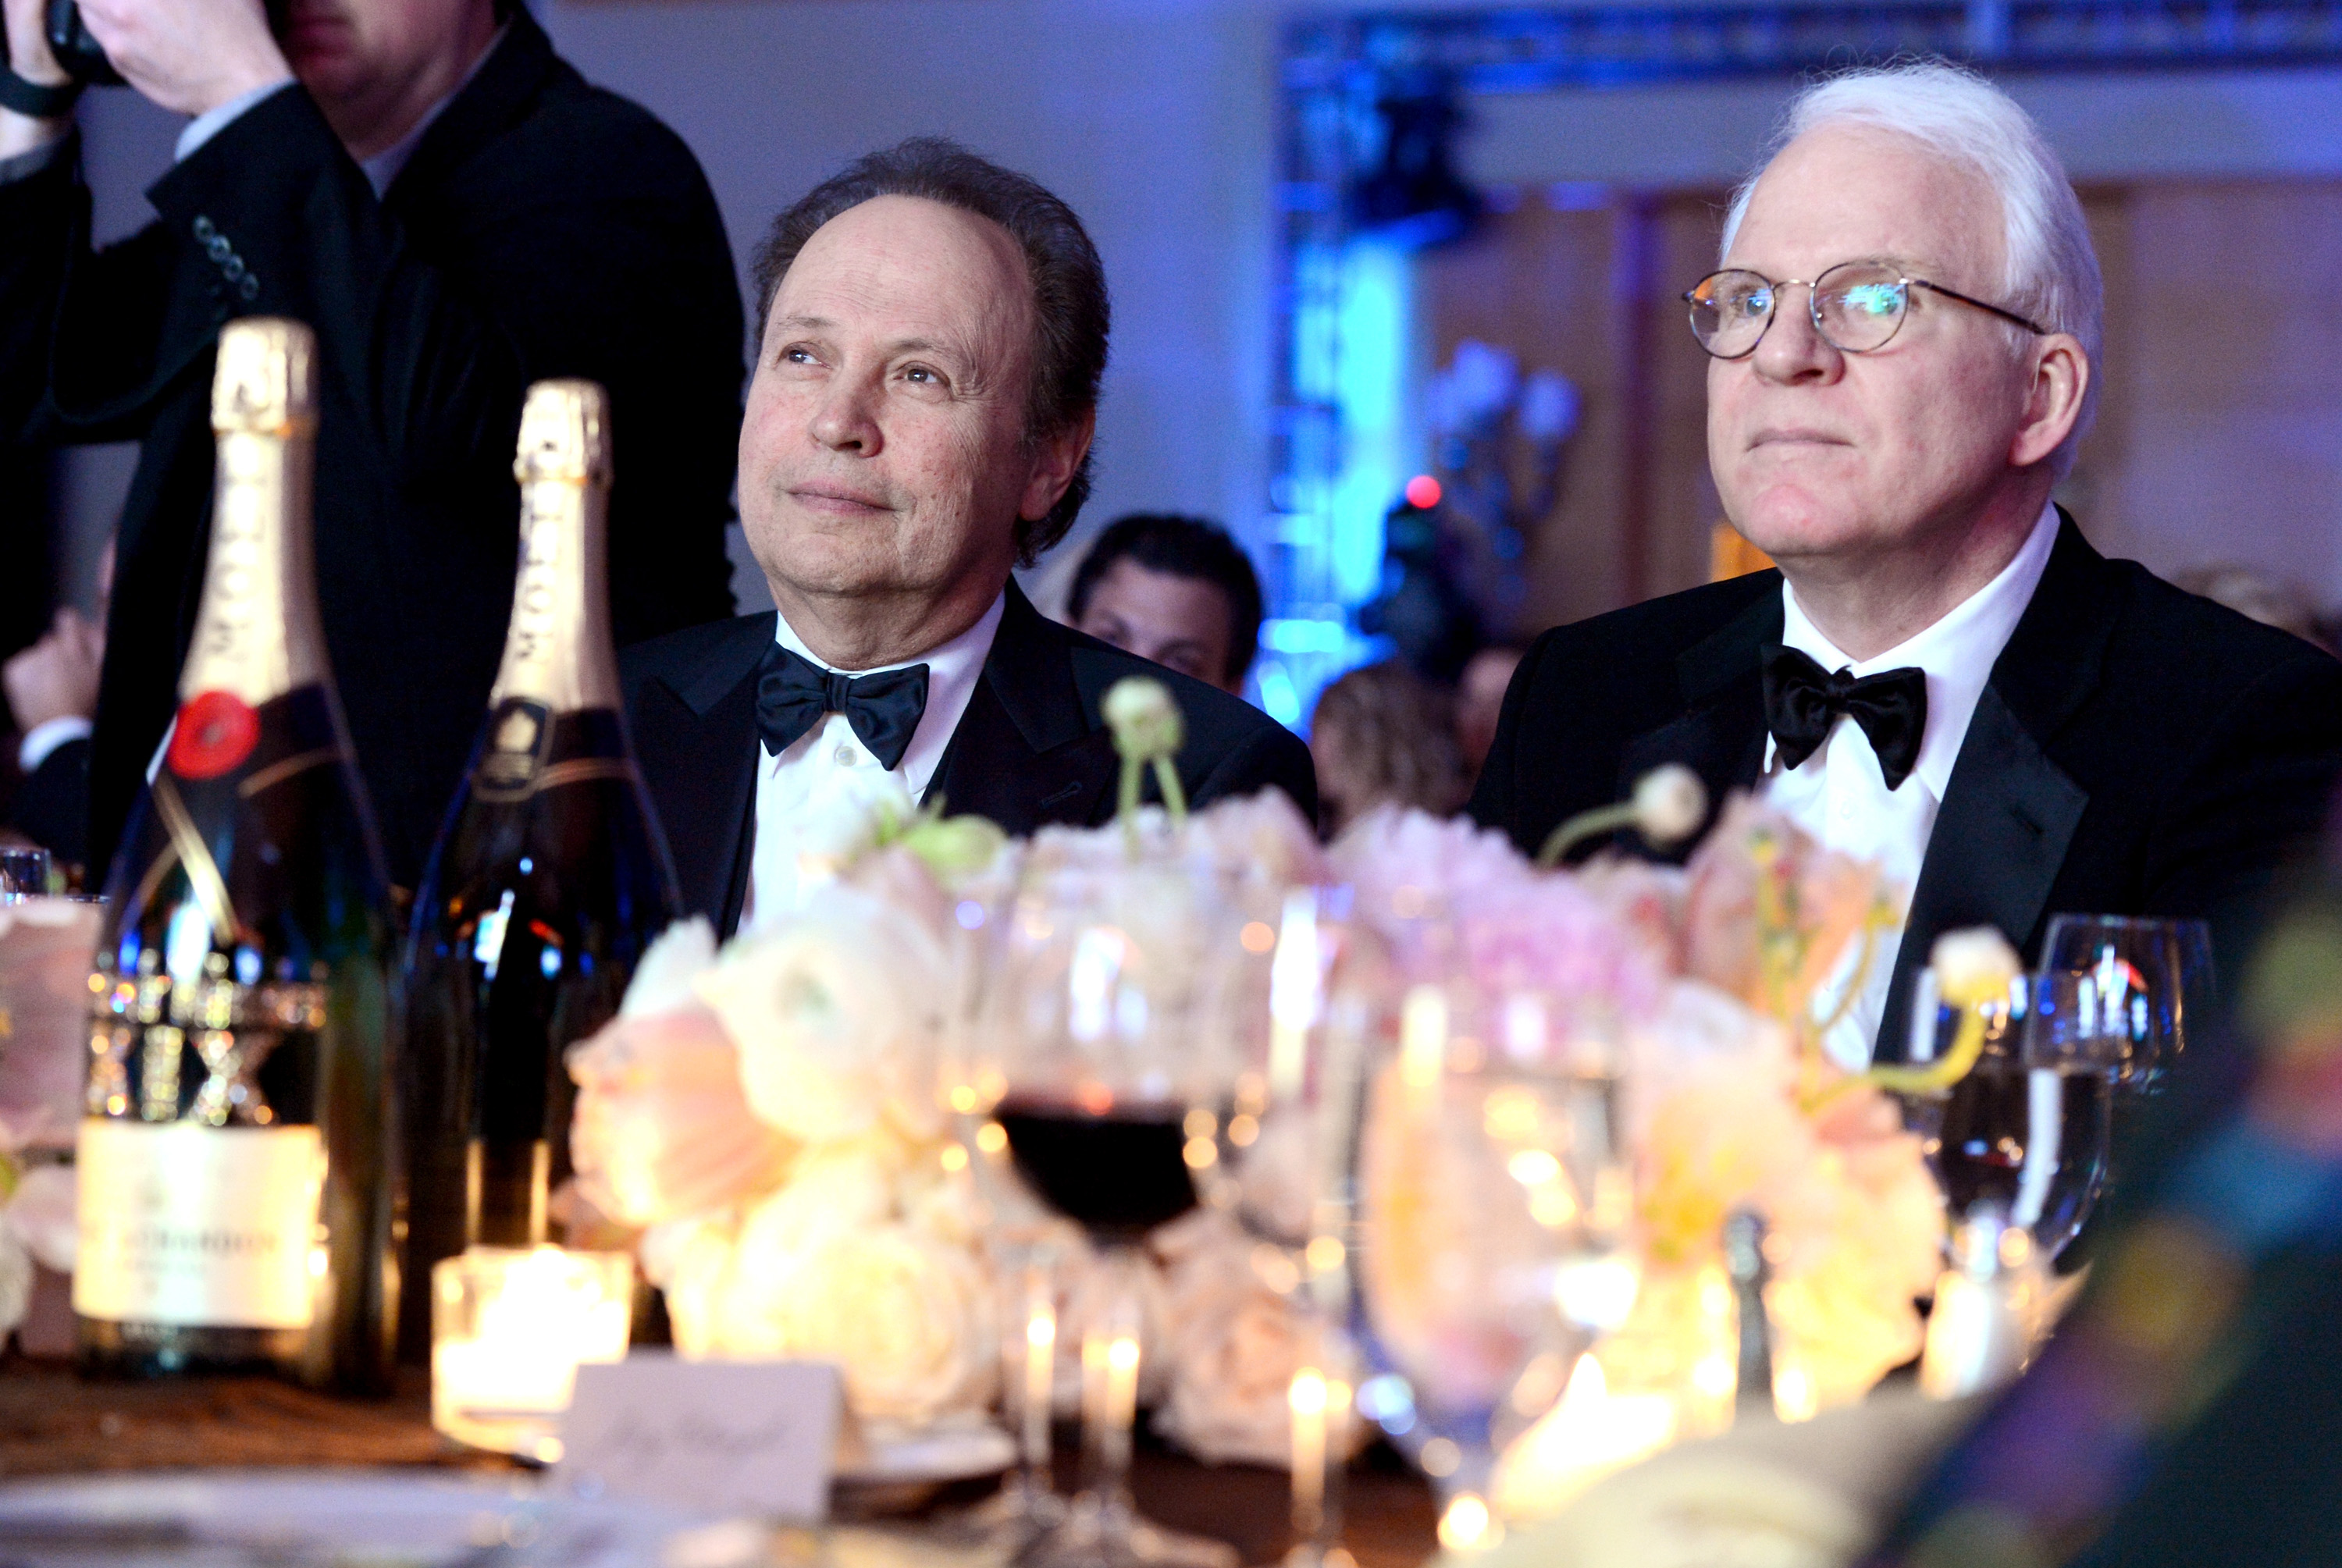 PHOENIX, AZ - MARCH 23:  Comedian Billy Crystal and Steve Martin with Moet & Chandon at Celebrity Fight Night XIX at JW Marriott Desert Ridge Resort & Spa on March 23, 2013 in Phoenix, Arizona.  (Photo by Michael Kovac/Getty Images)